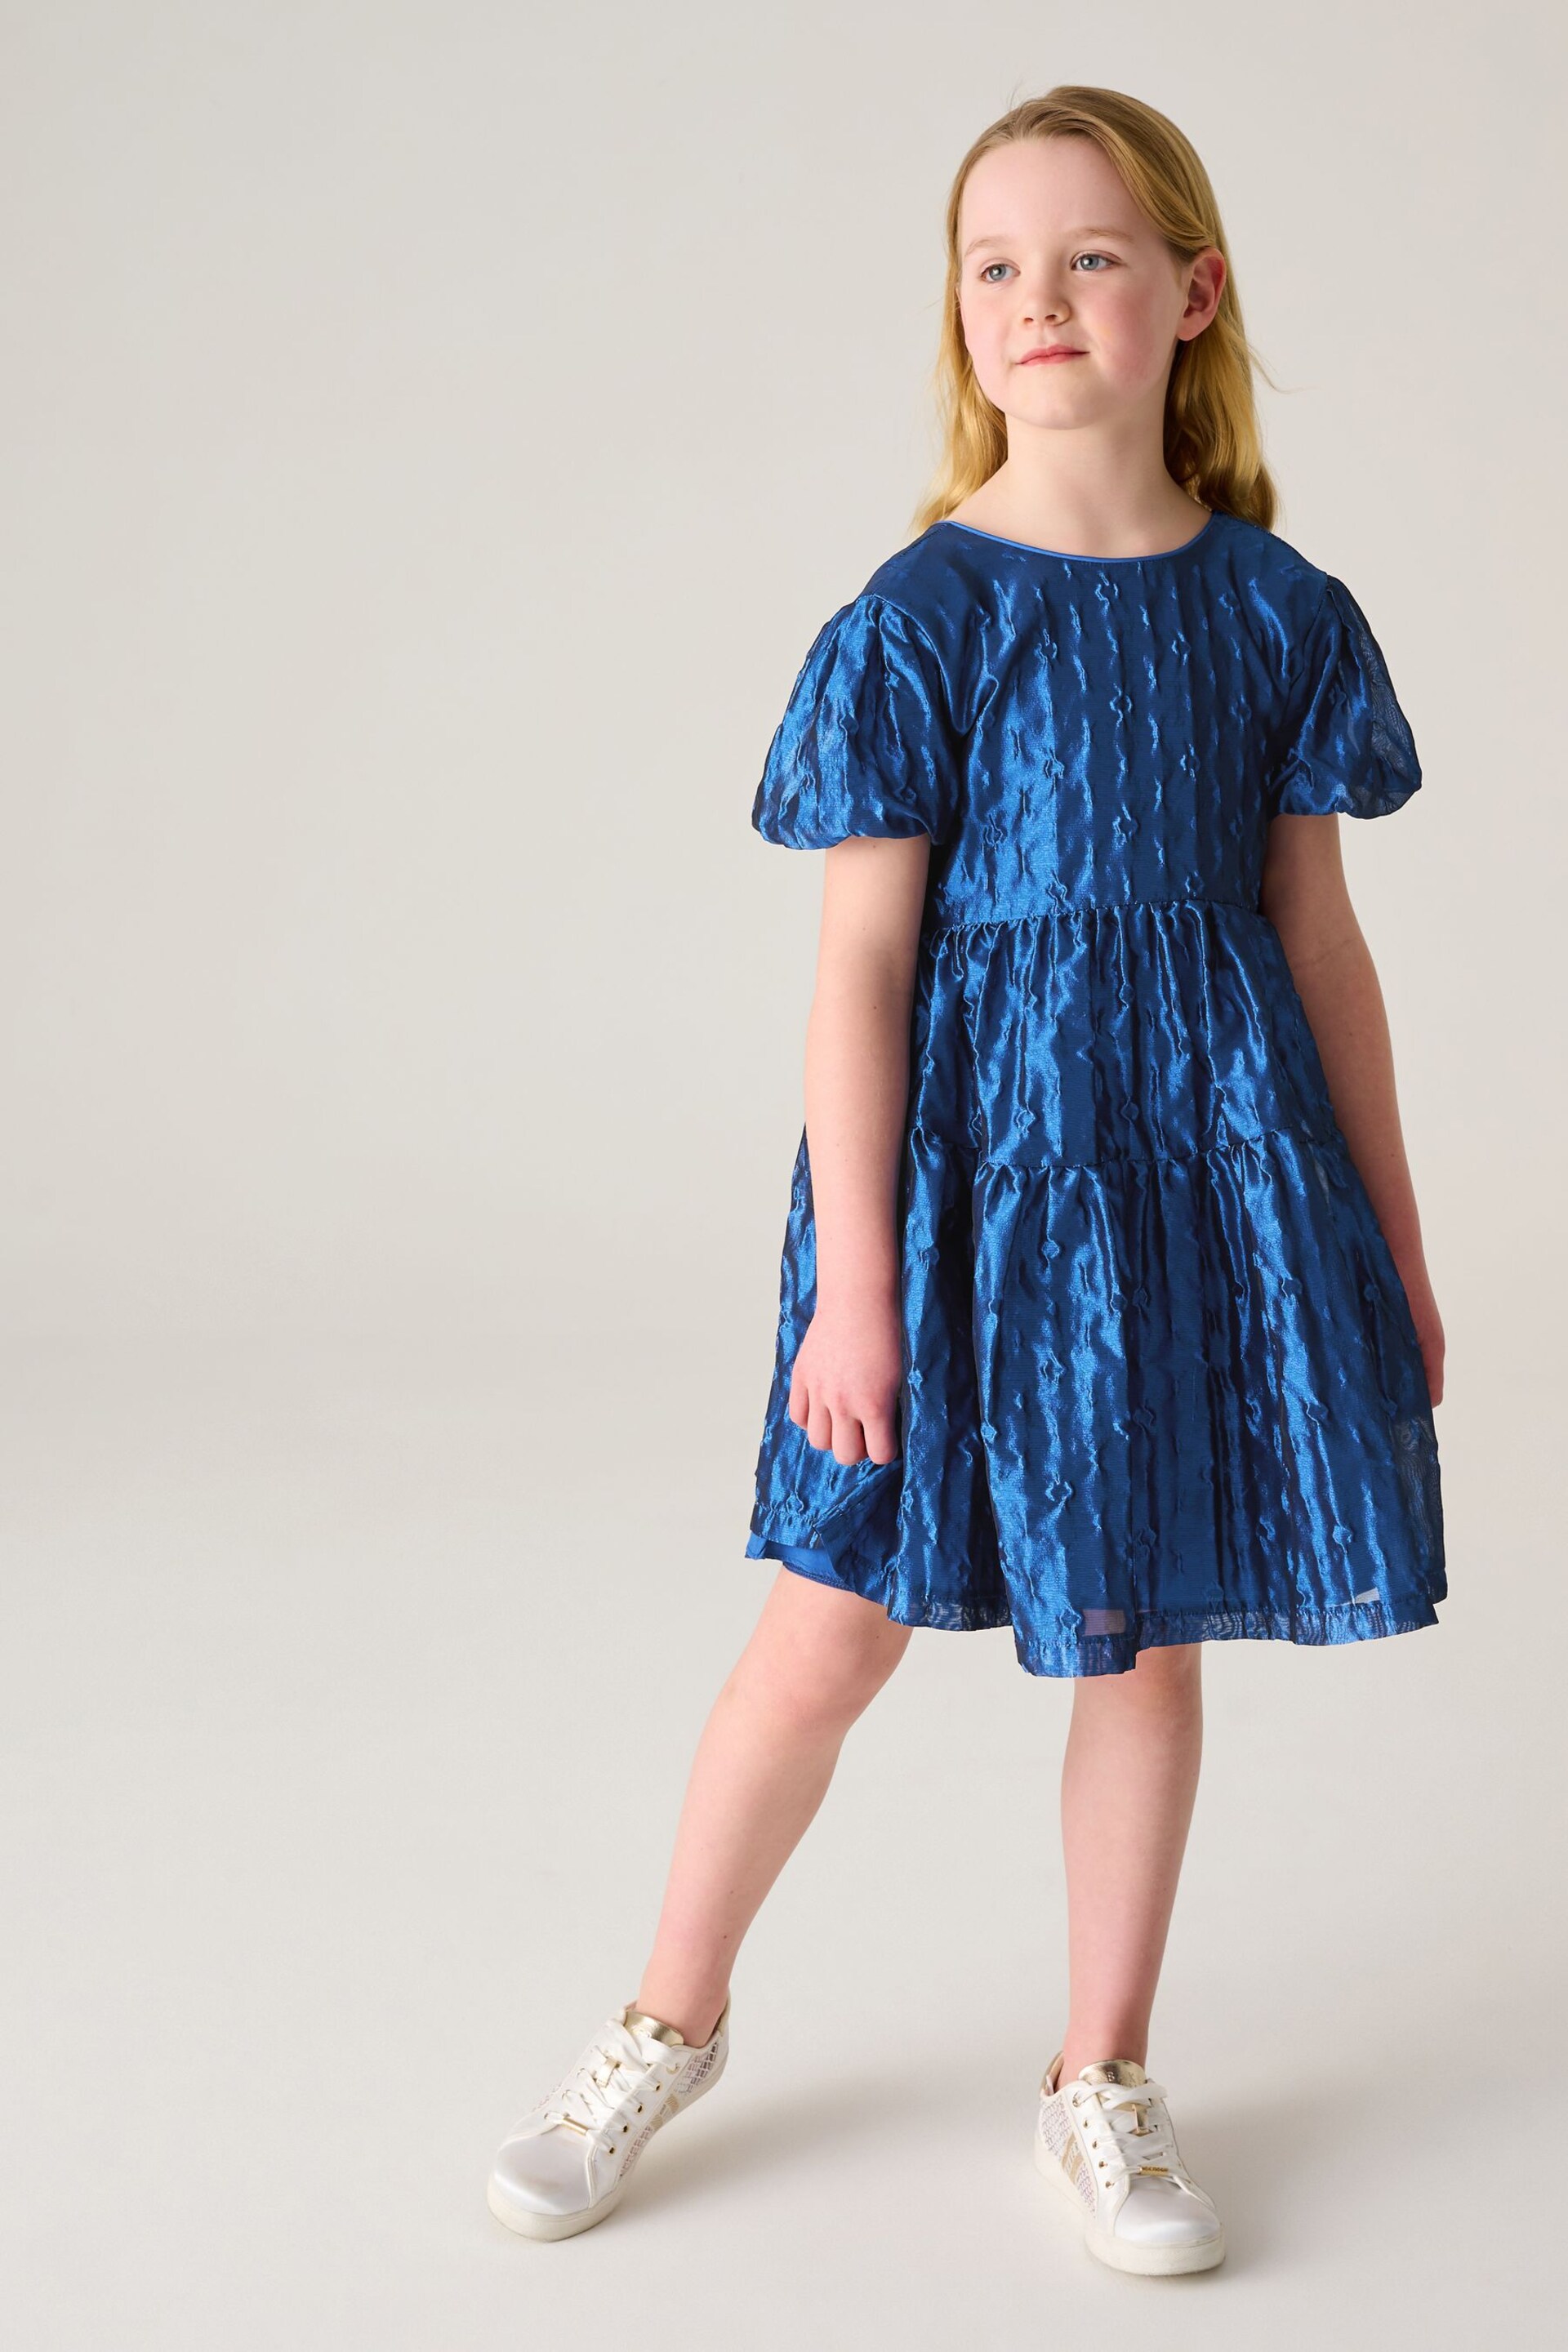 Baker by Ted Baker Blue Cloque Dress - Image 1 of 10